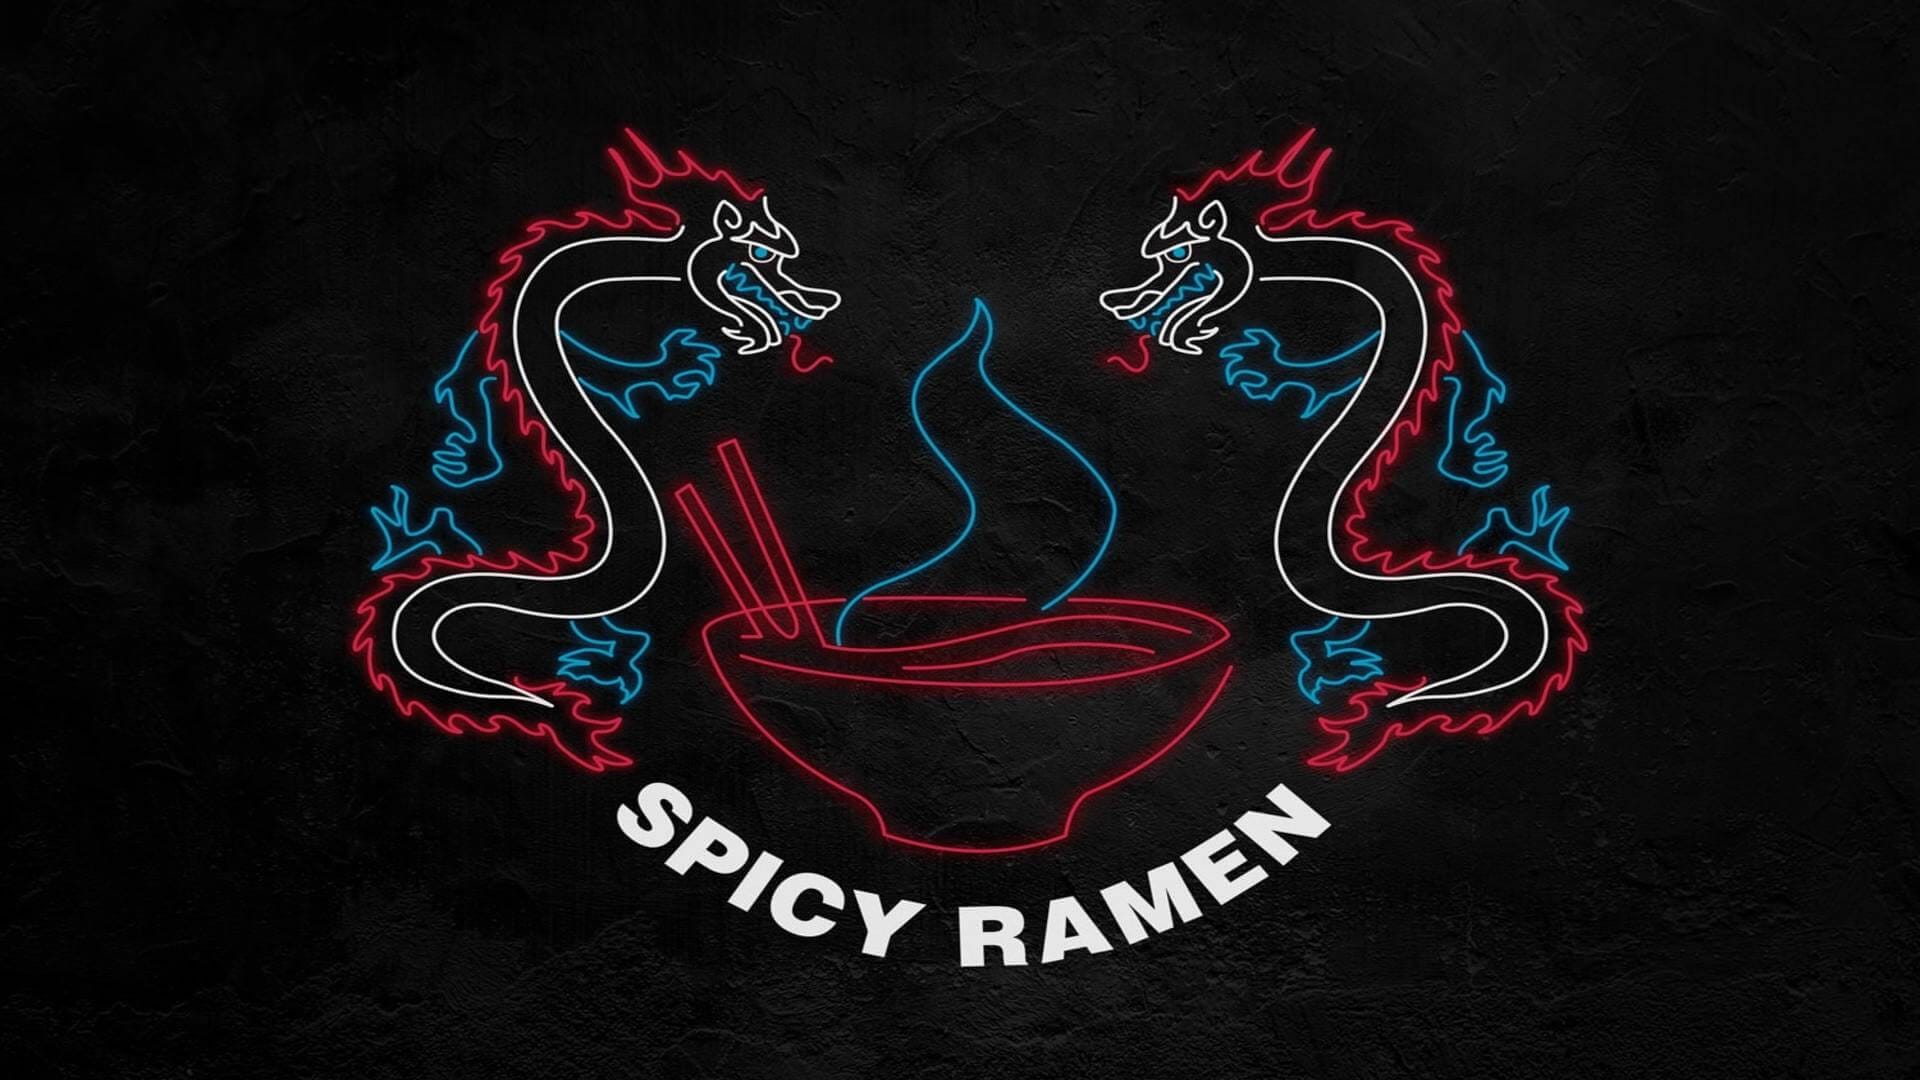 The logo for Spicry Ramen from Destiny 2.